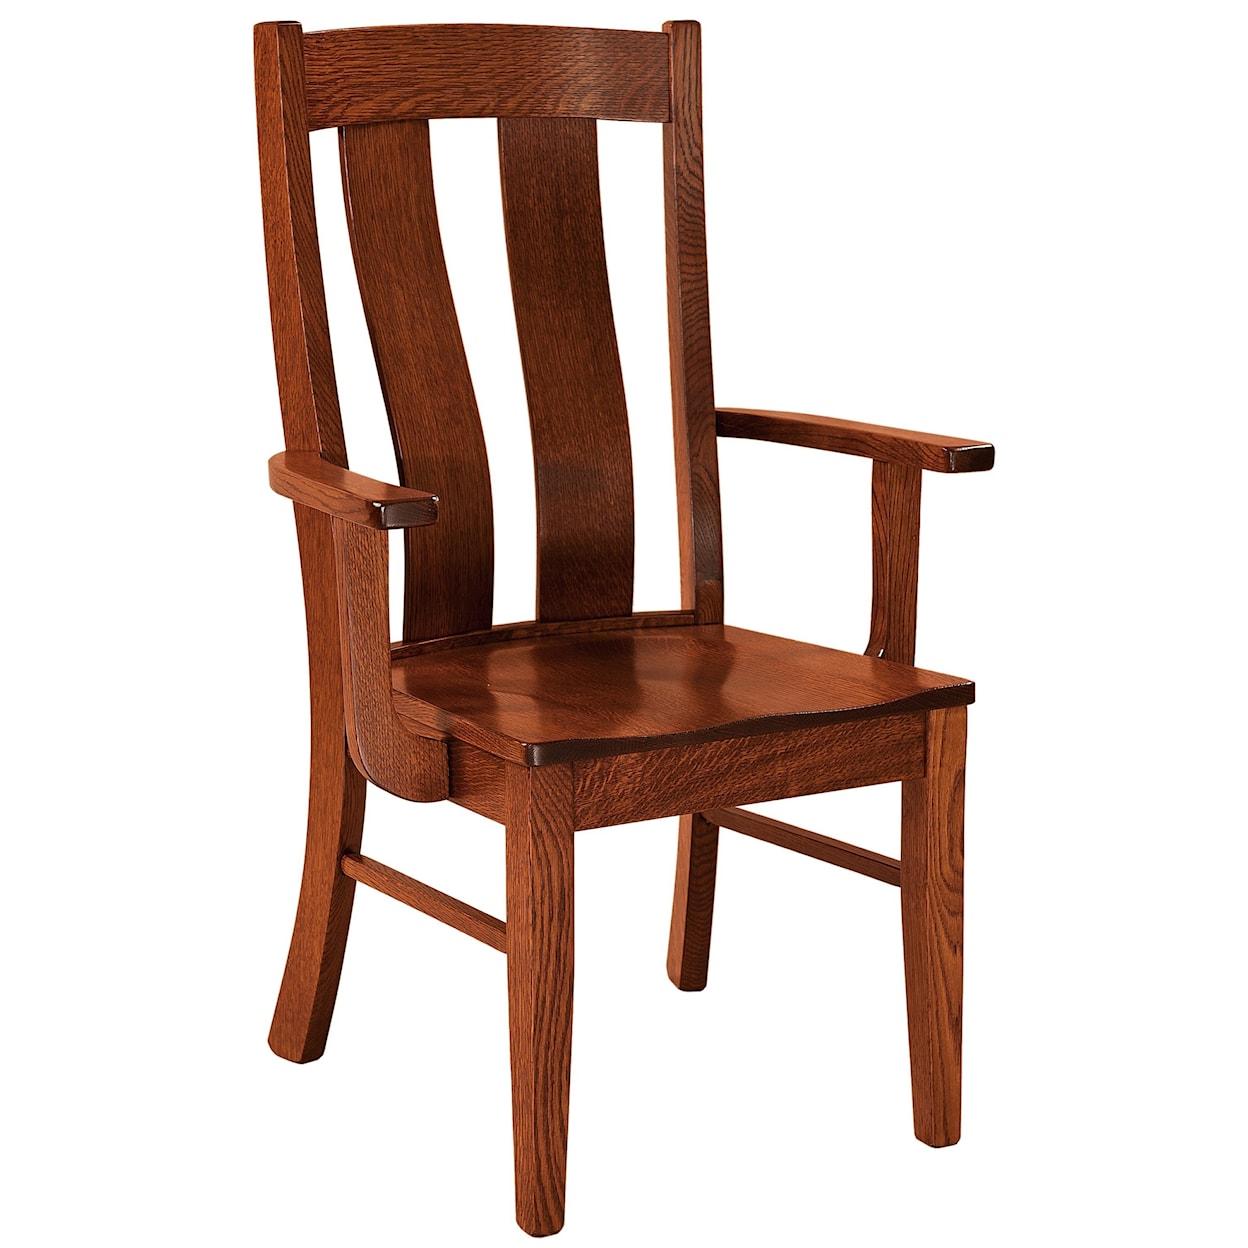 F&N Woodworking Laurie Arm Chair - Fabric Seat